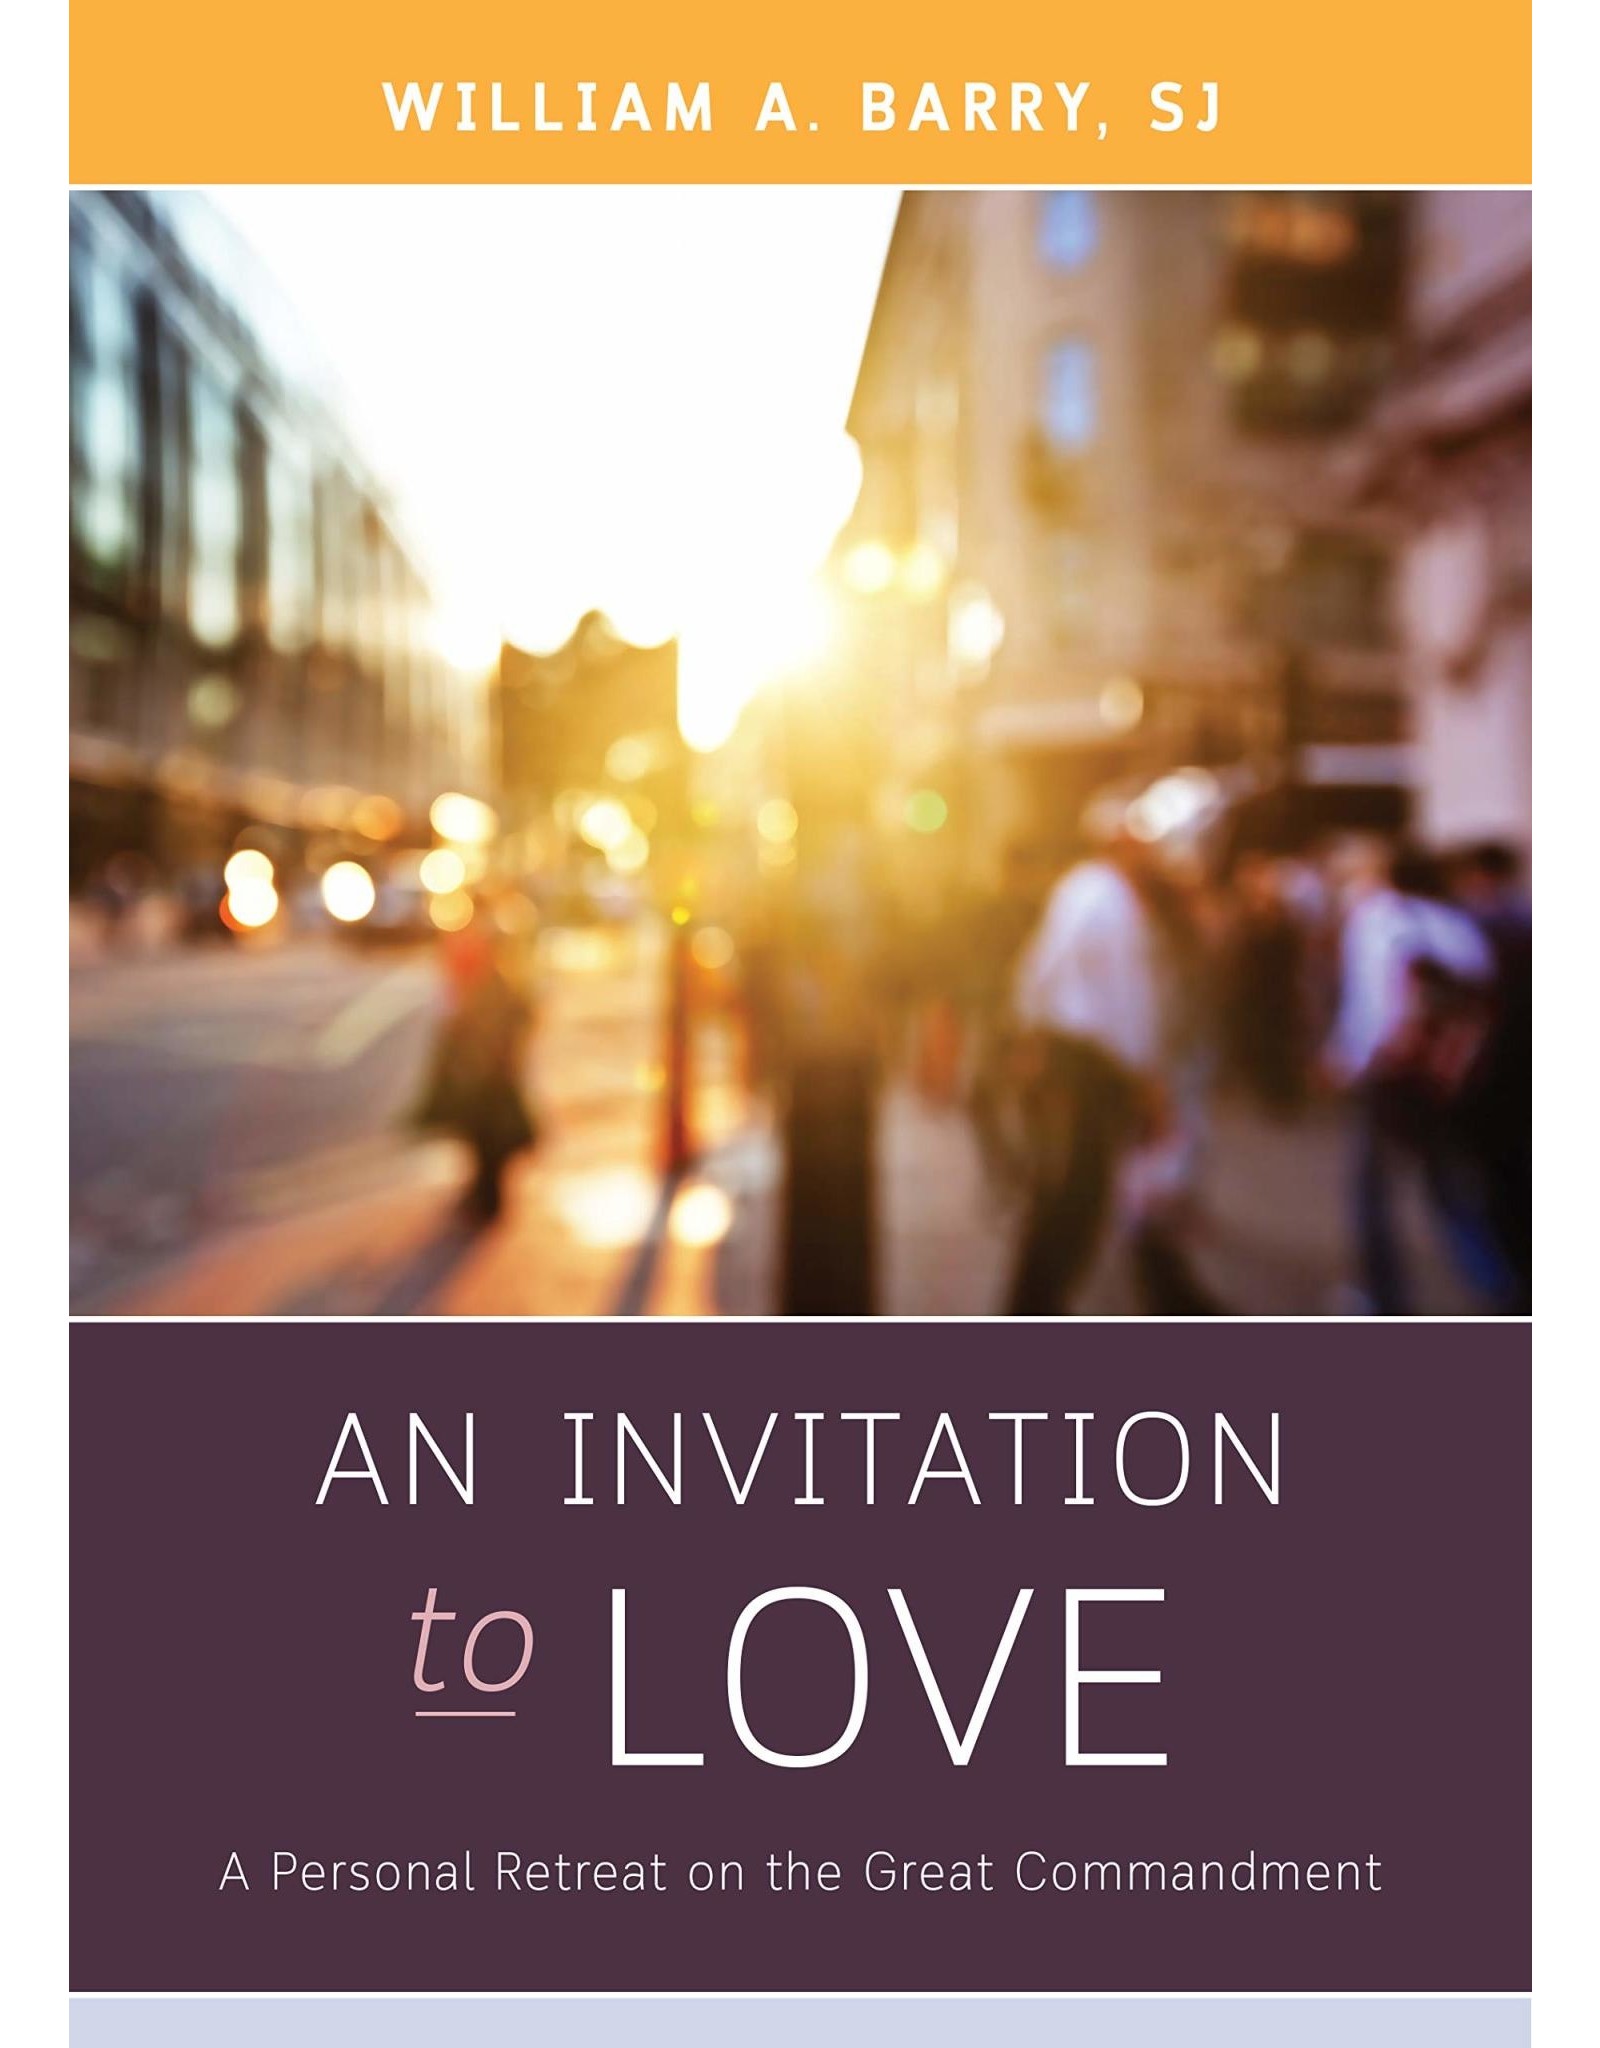 An Invitation to Love: A Personal Retreat on the Great Commandment